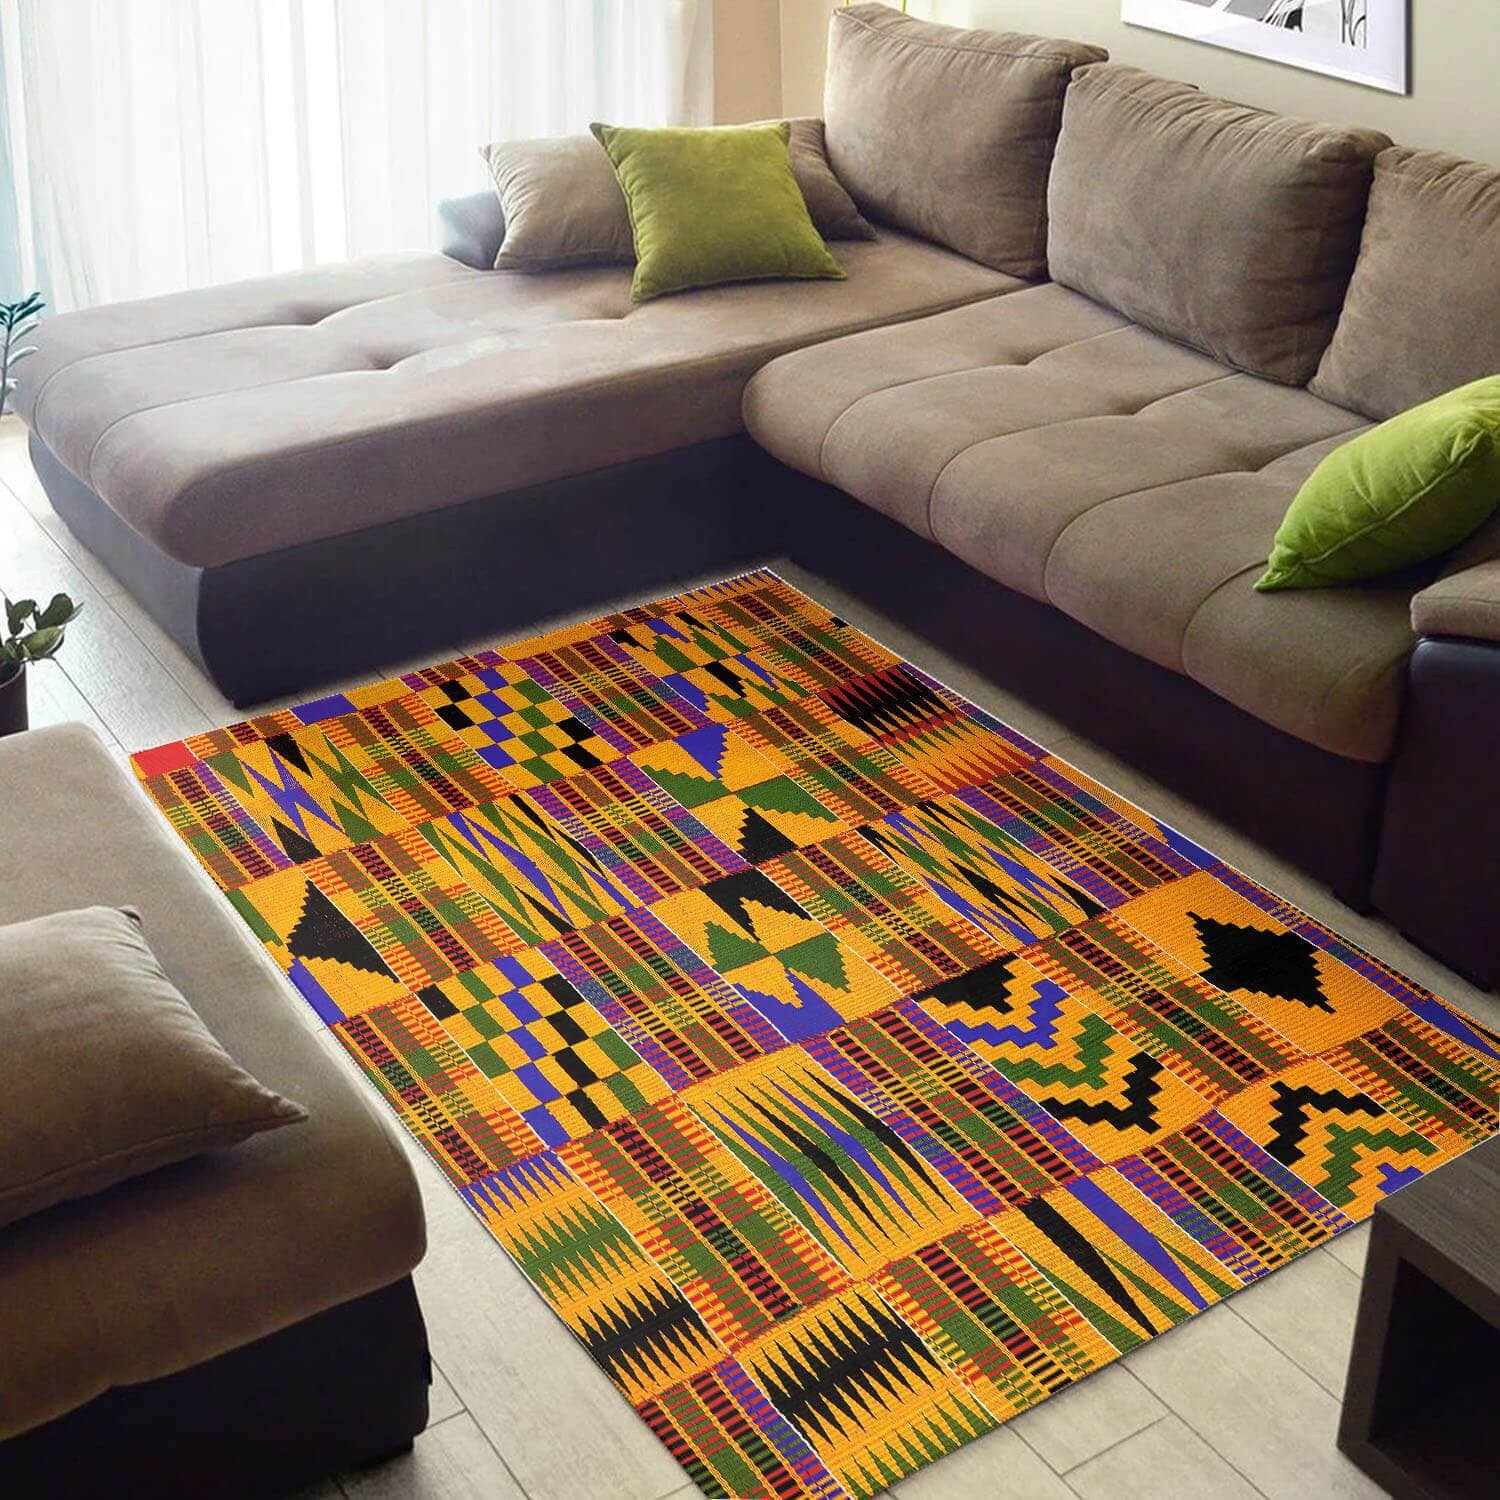 Modern African Amazing Themed Ethnic Seamless Pattern Design Floor Inspired Home Rug